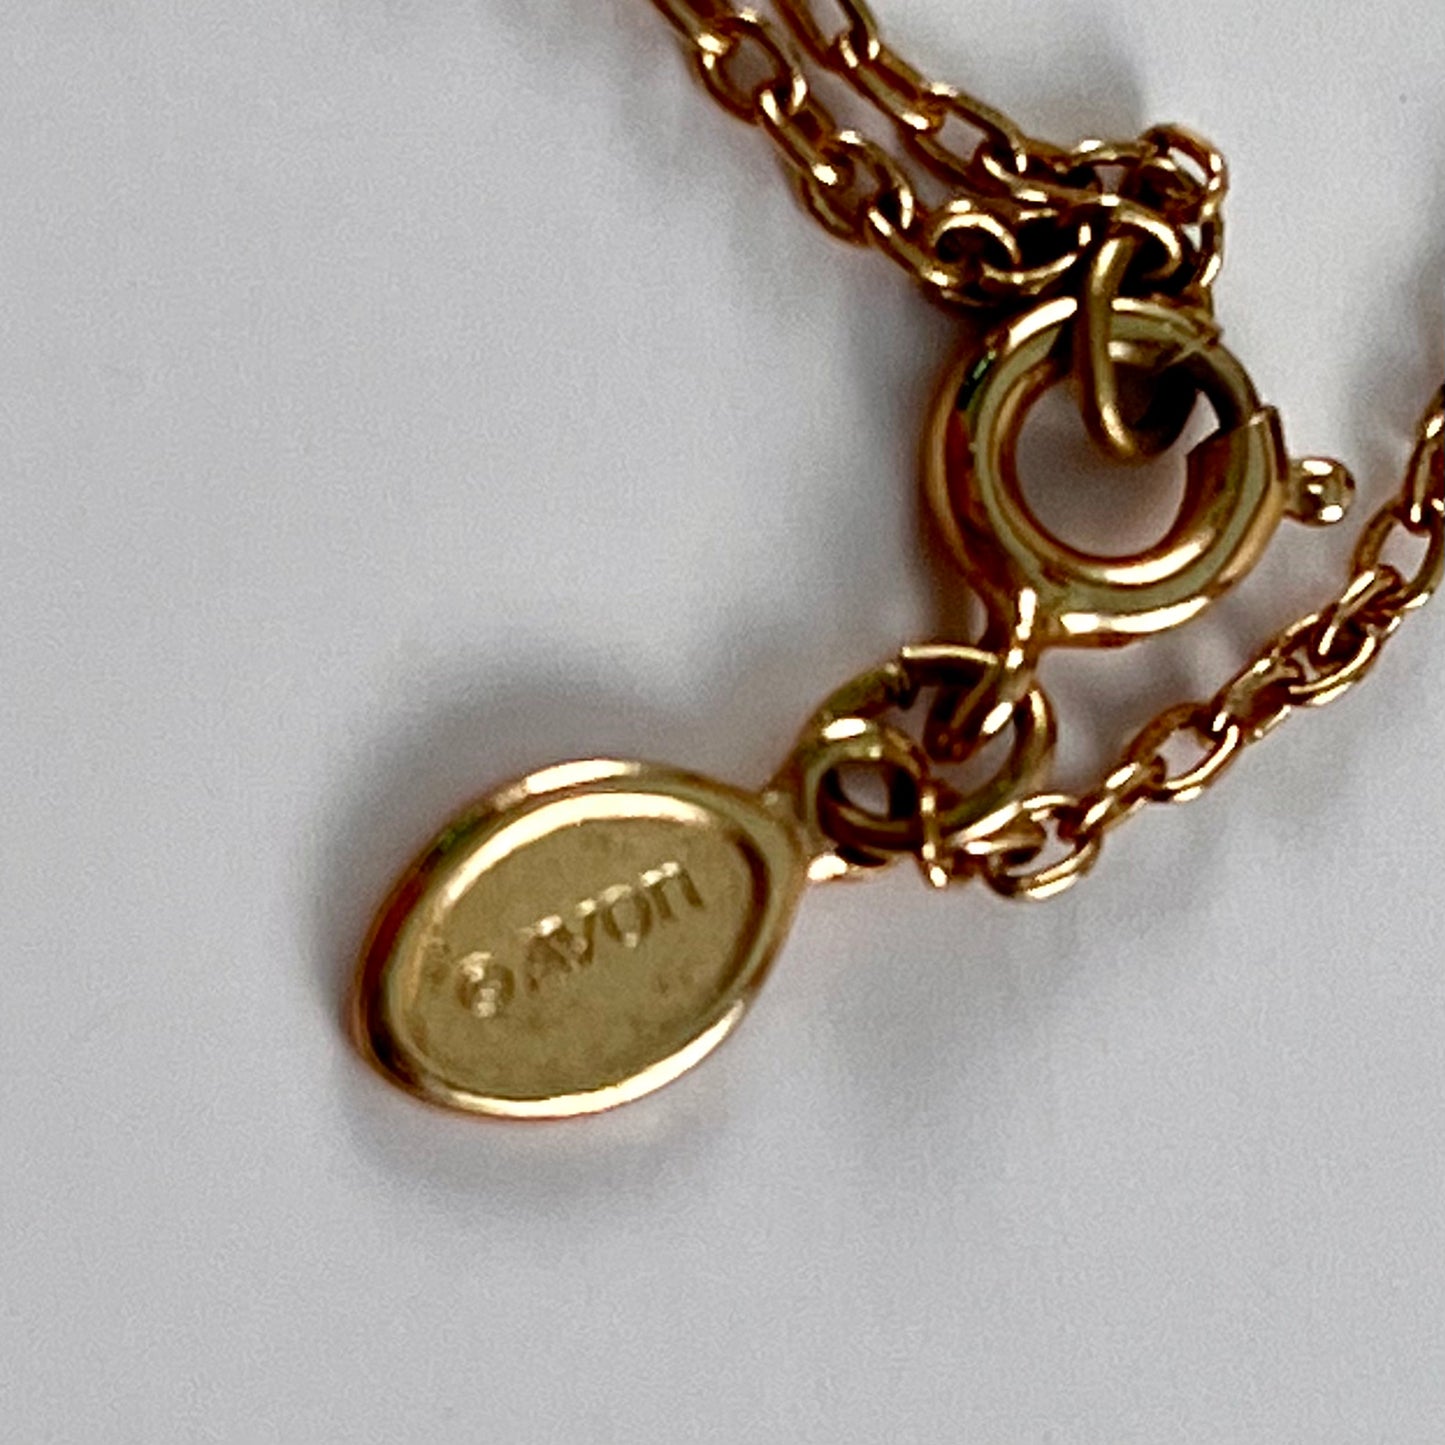 1978 Avon Initial Attraction Necklace